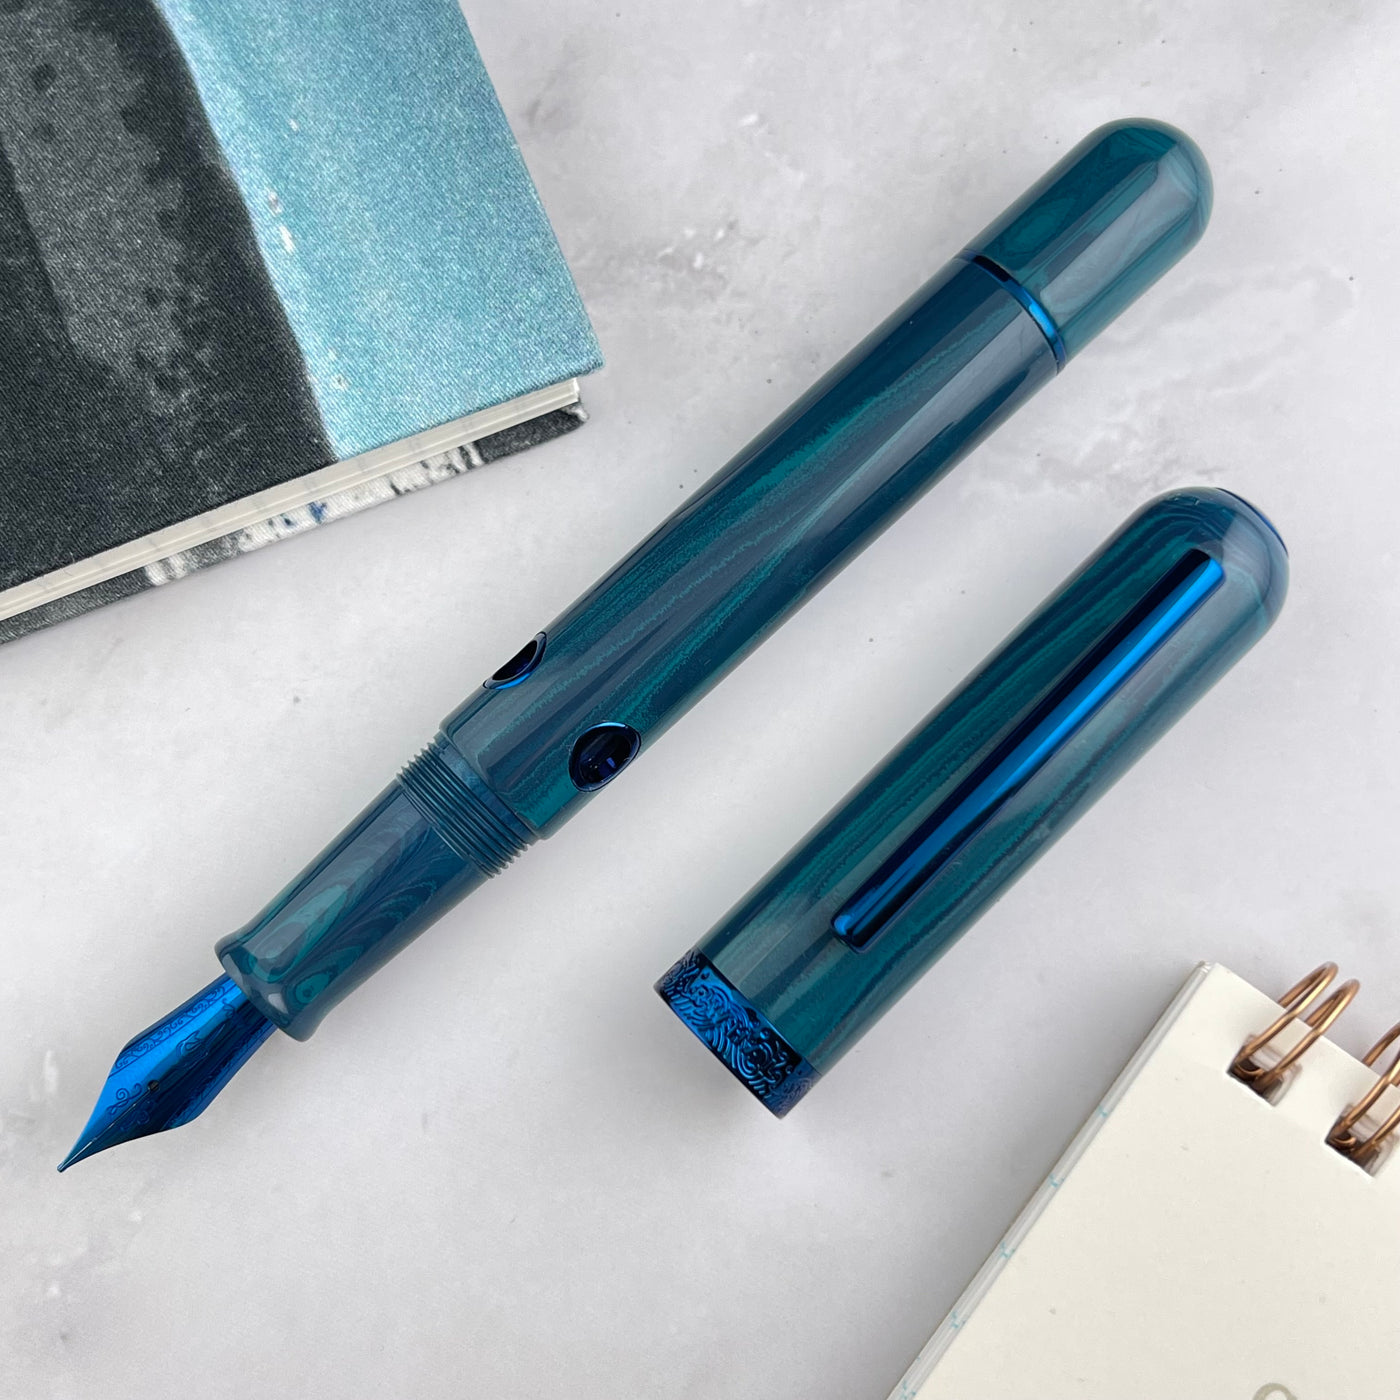 Nahvalur (Narwhal) Nautilus Fountain Pen - Faroe Marine (Limited Edition)